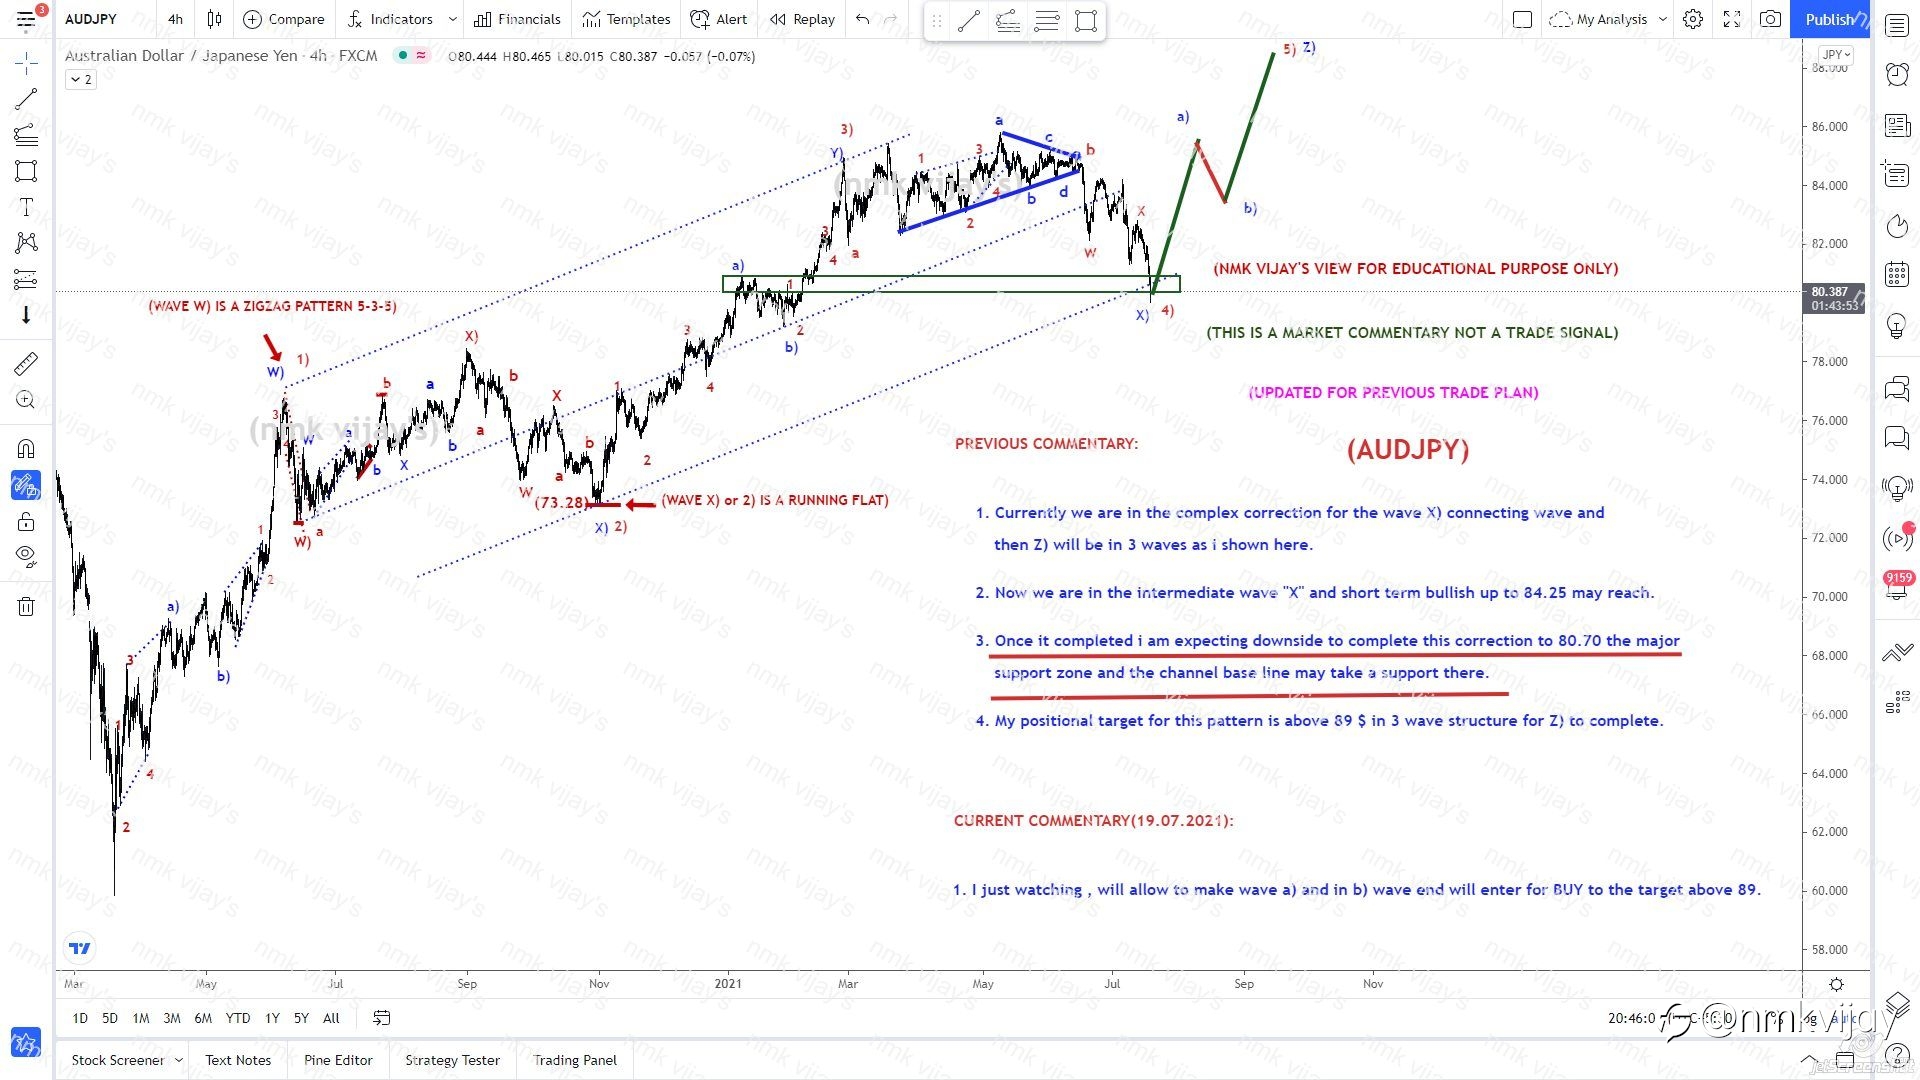 AUDJPY-Reached my BUY zone 80.70 as per previous trade plan...